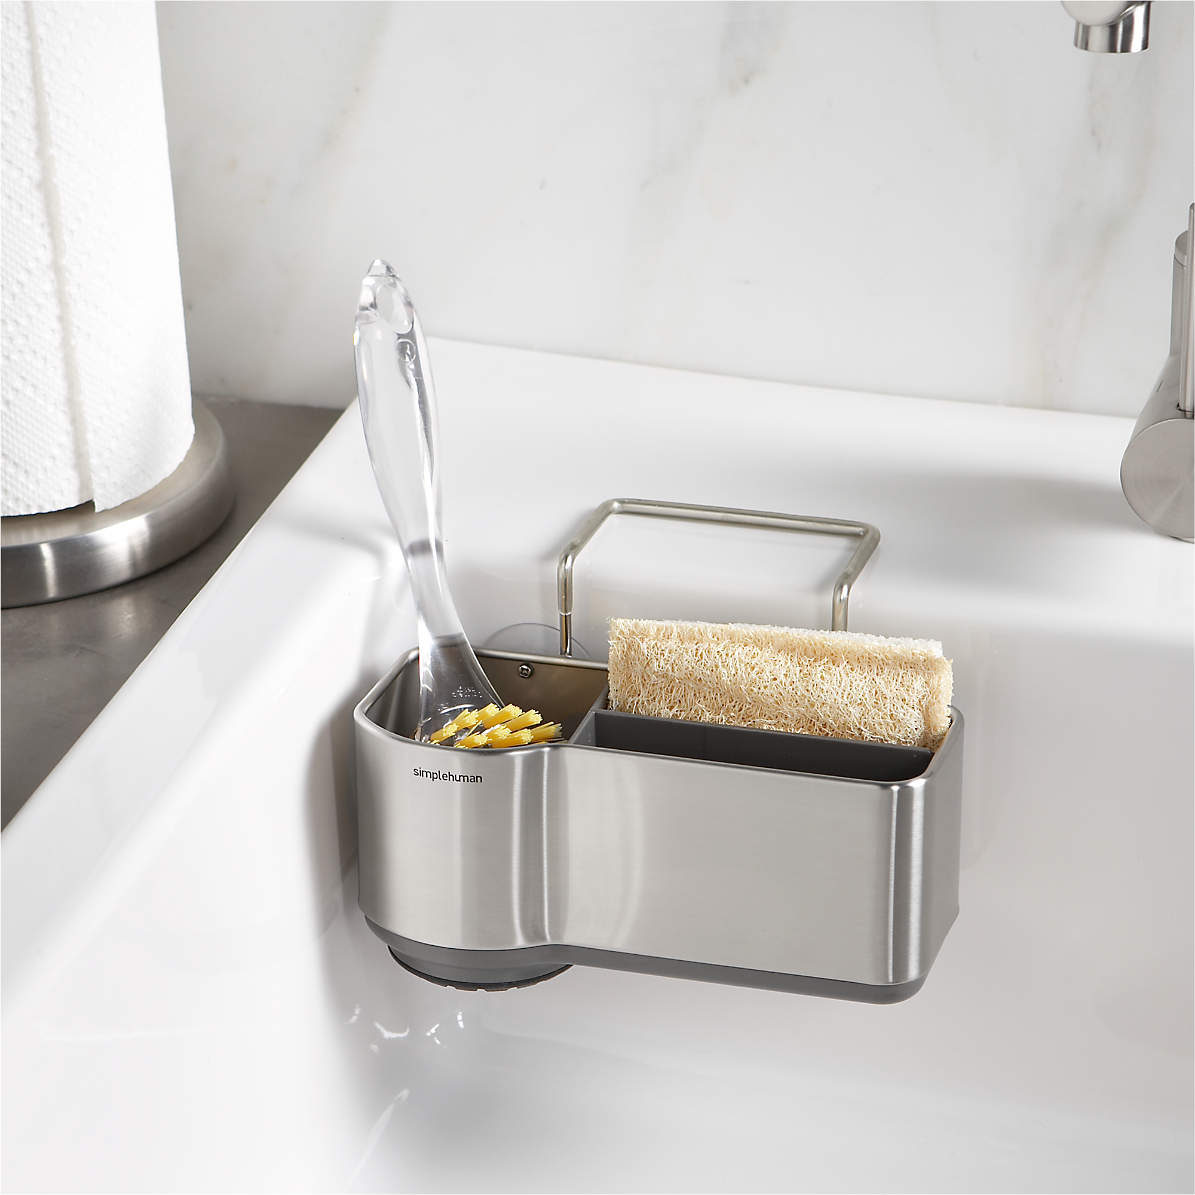 simplehuman Sink Caddy + Reviews | Crate and Barrel